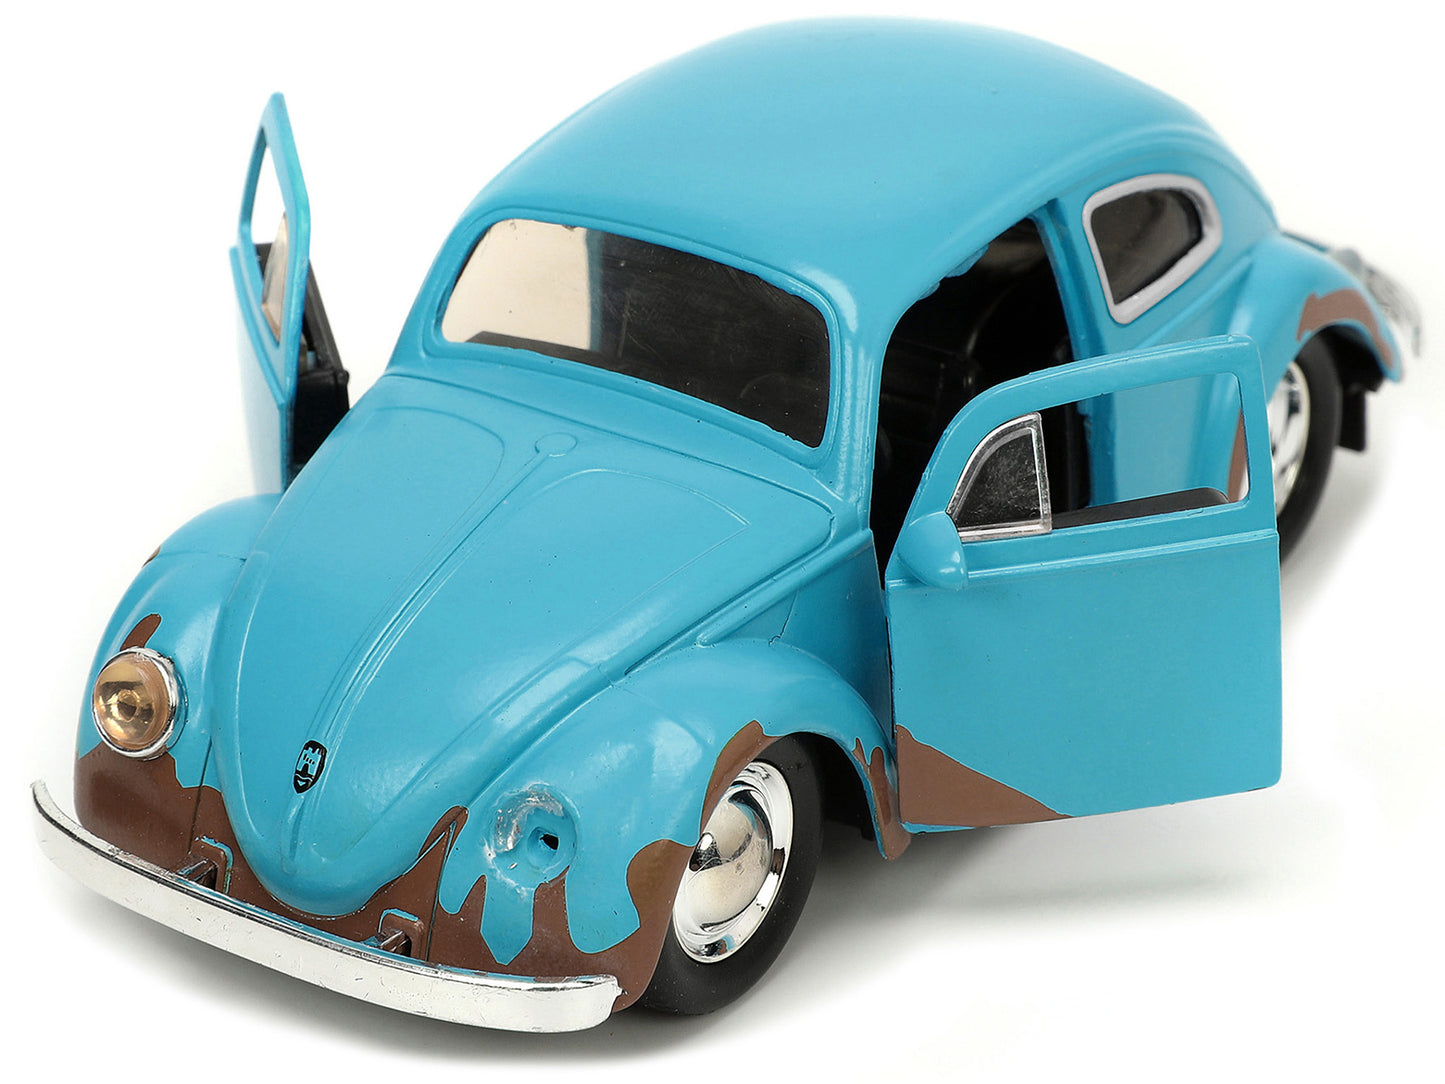 Volkswagen Beetle Matt Blue (Weathered) and Stitch Diecast Figure "Lilo and Stitch" (2002) Movie "Hollywood Rides" Series 1/32 Diecast Model Car by Jada